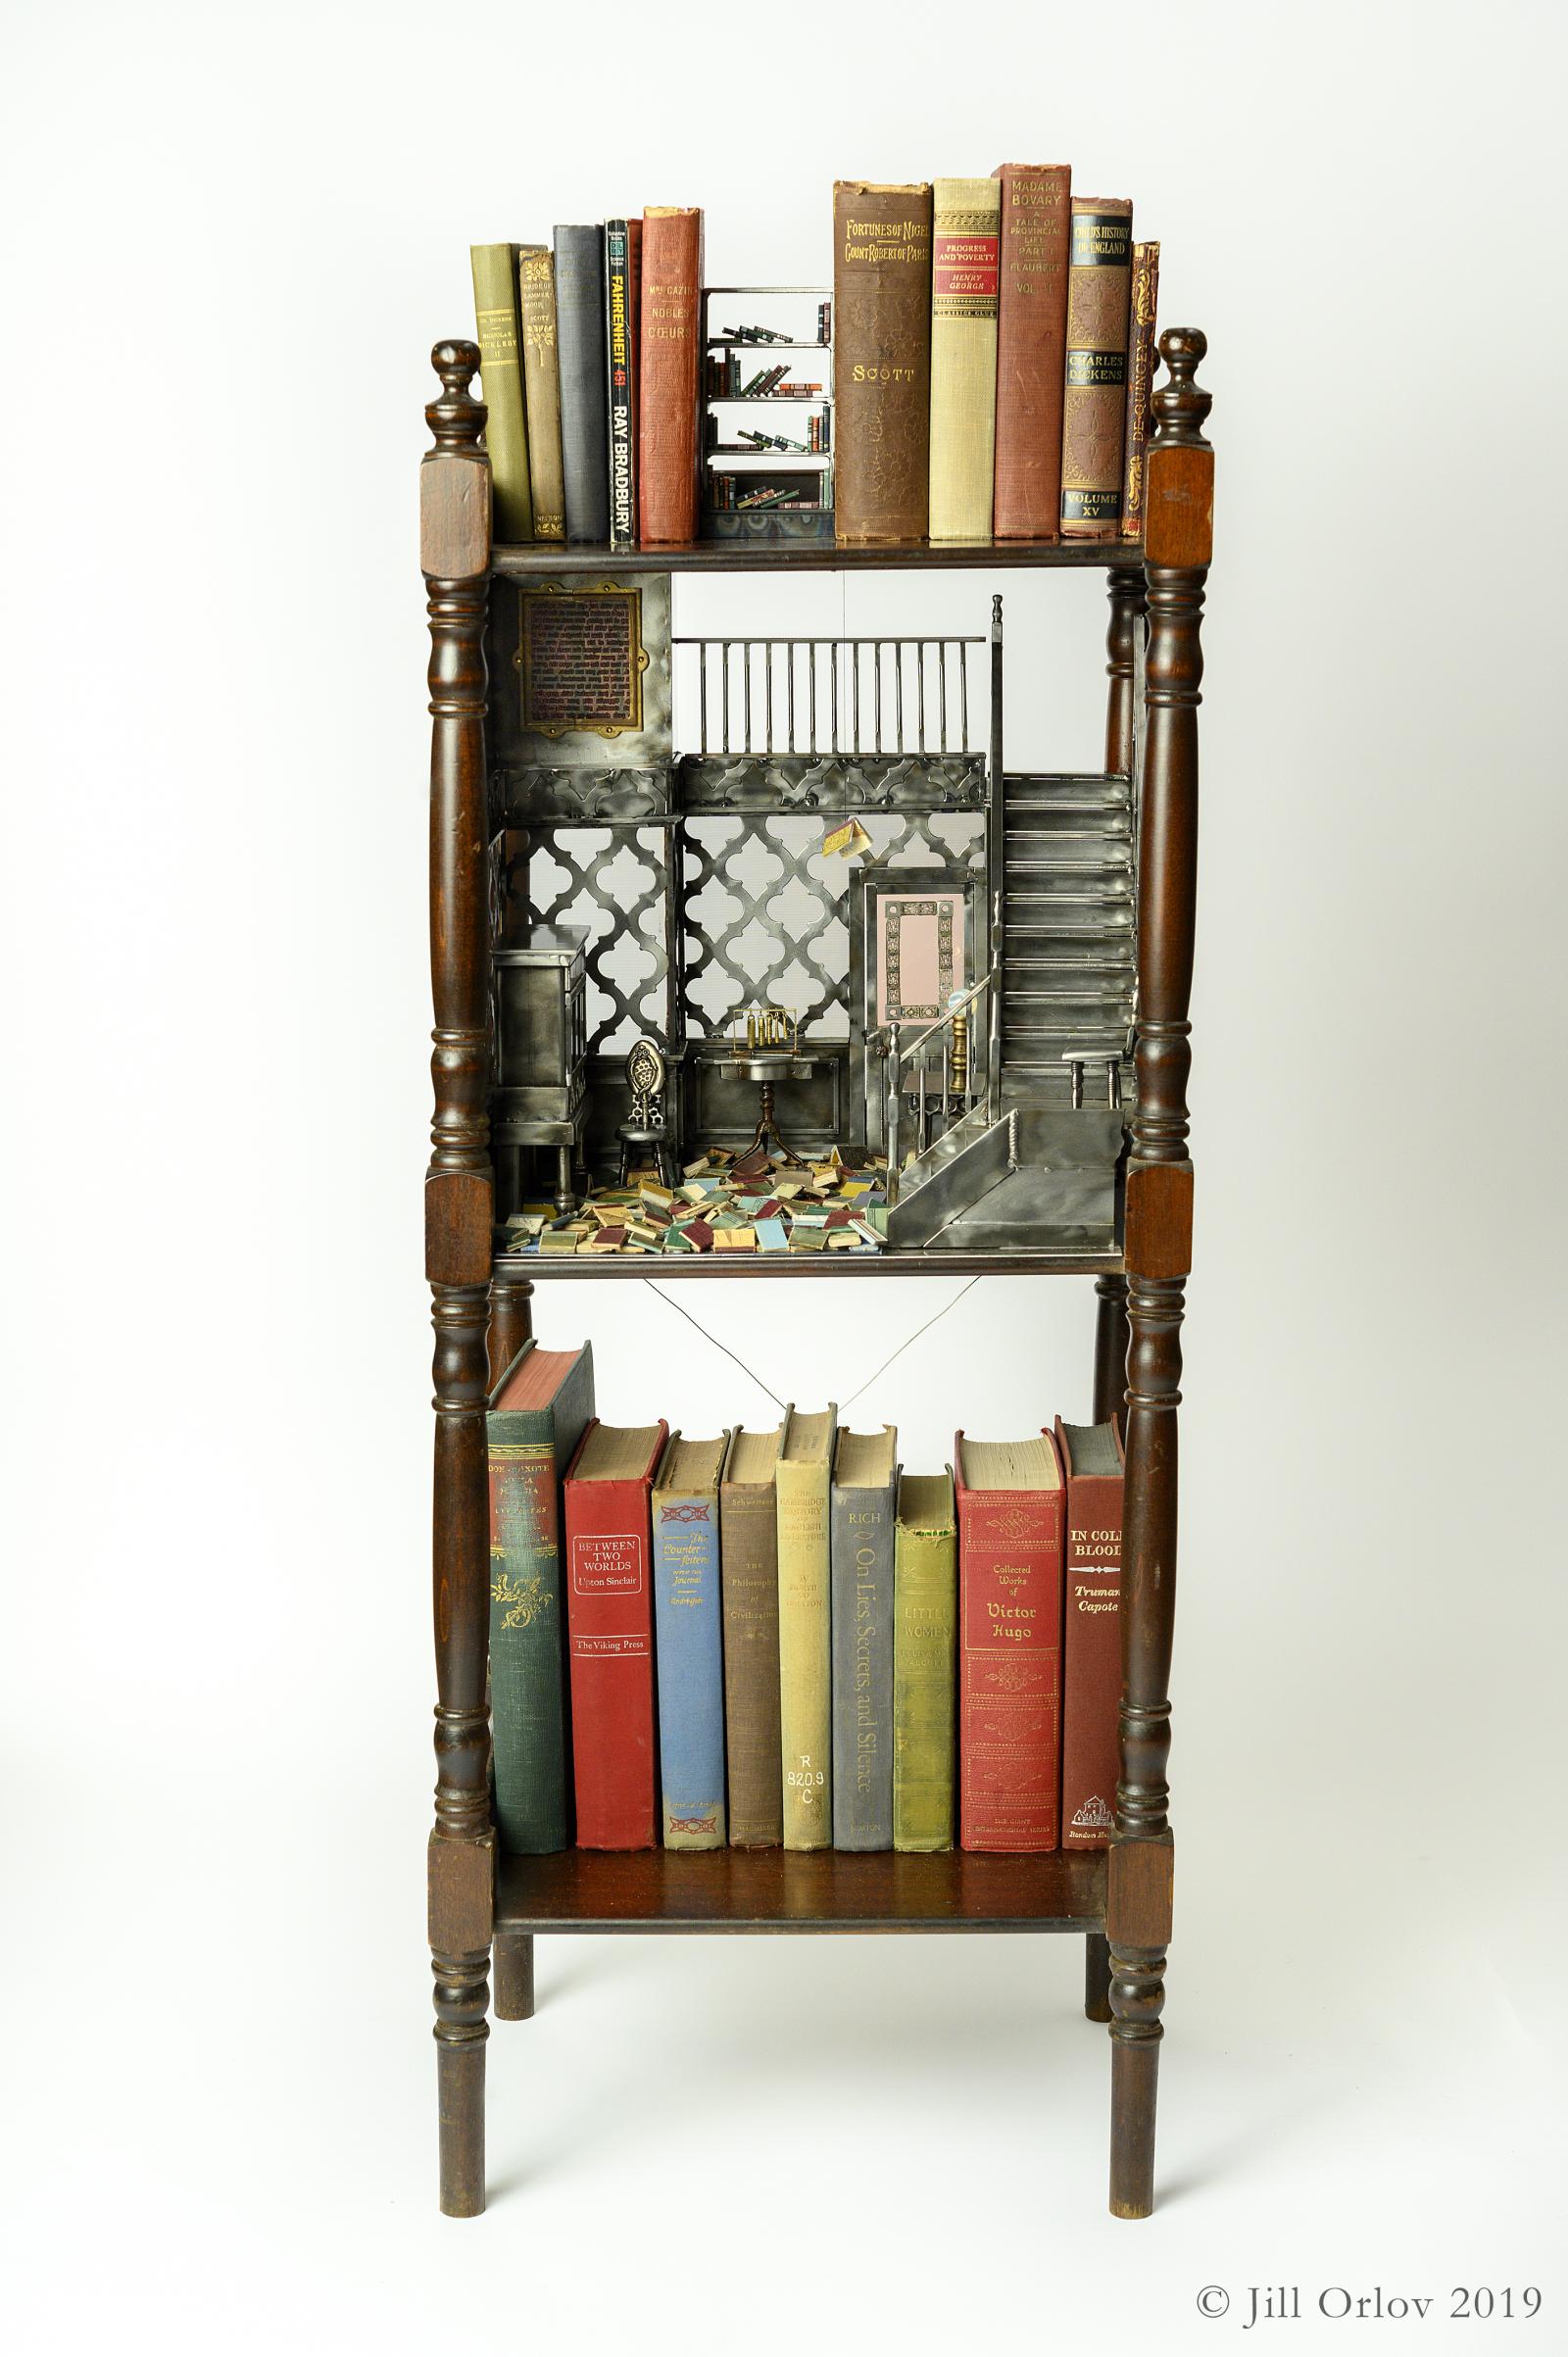 Full view of miniature vignette based on the book Fahrenheit 451 - set within the middle section of a Victorian bookshelf with the miniature attic above embedded in the full scale books